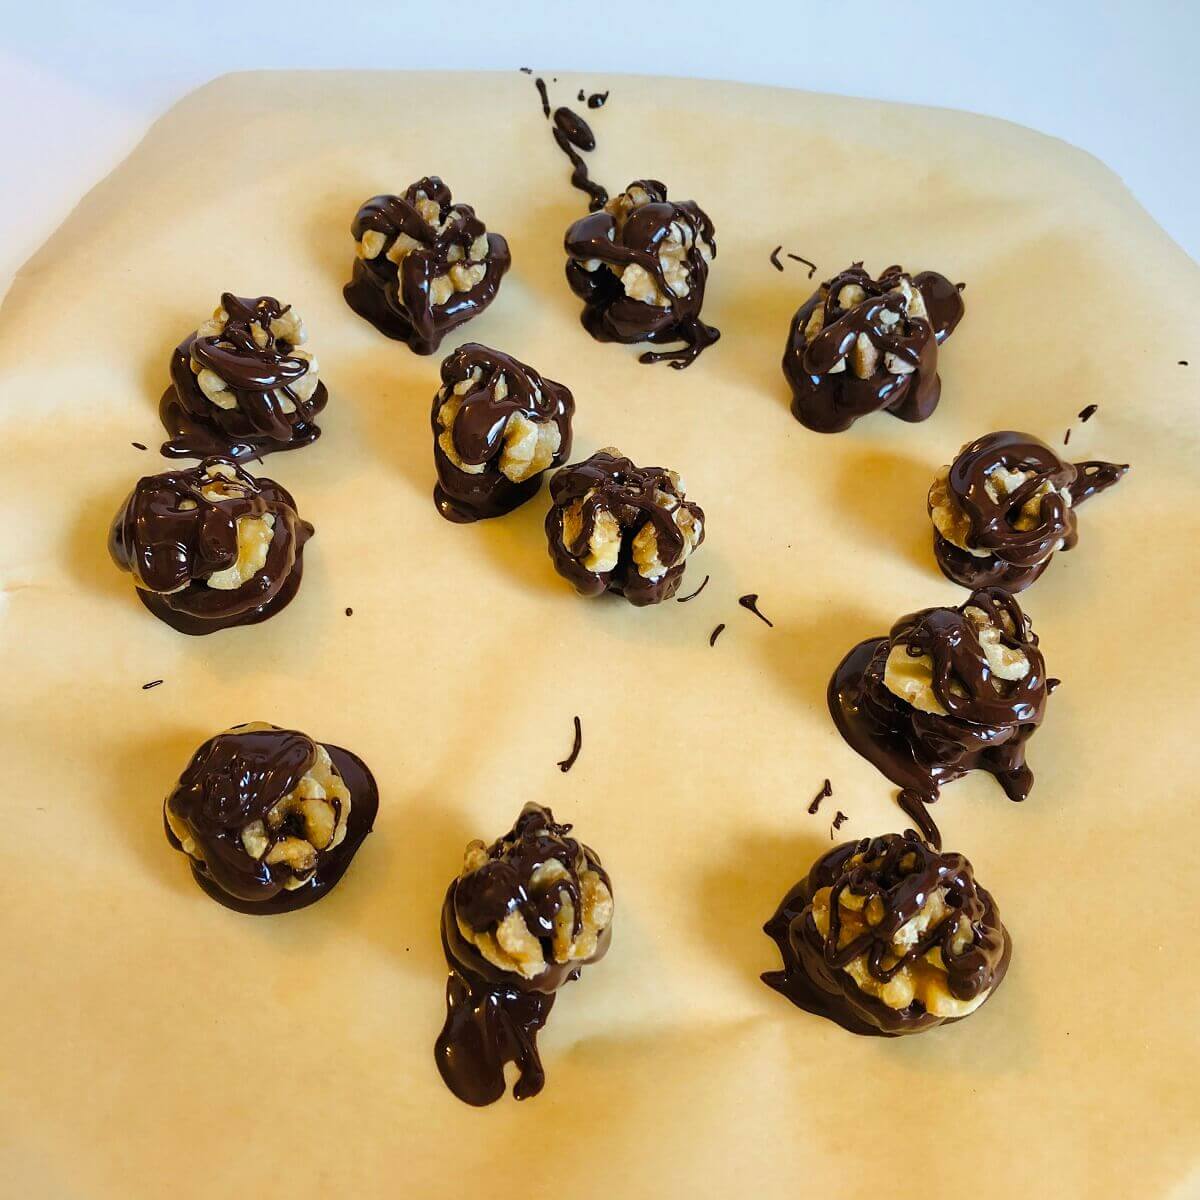 Nuts dipped in chocolate on a piece of parchment paper.